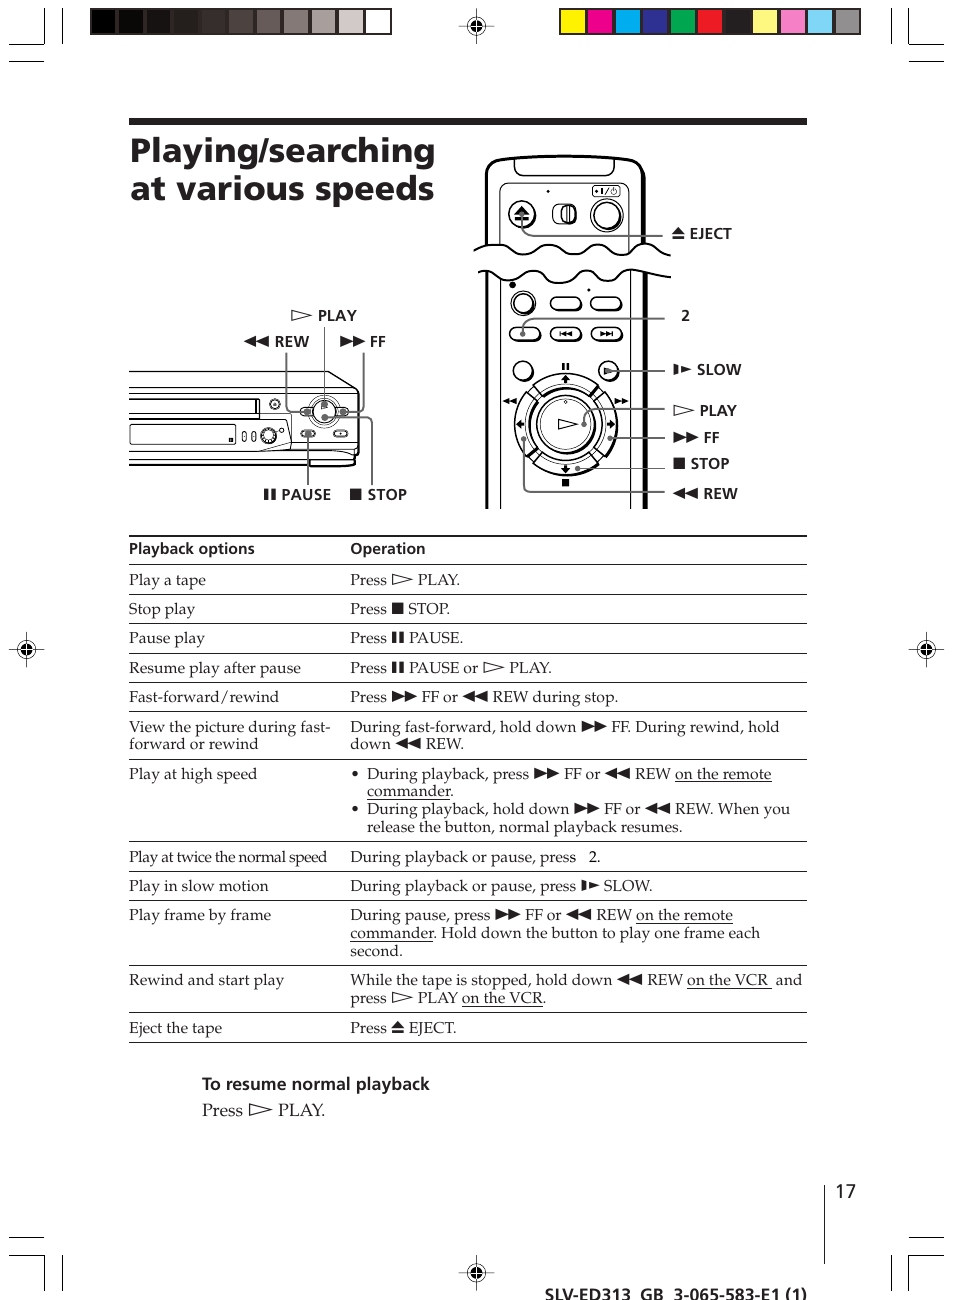 Playing/searching at various speeds | Sony SLV-ED313 User Manual | Page 17 / 20